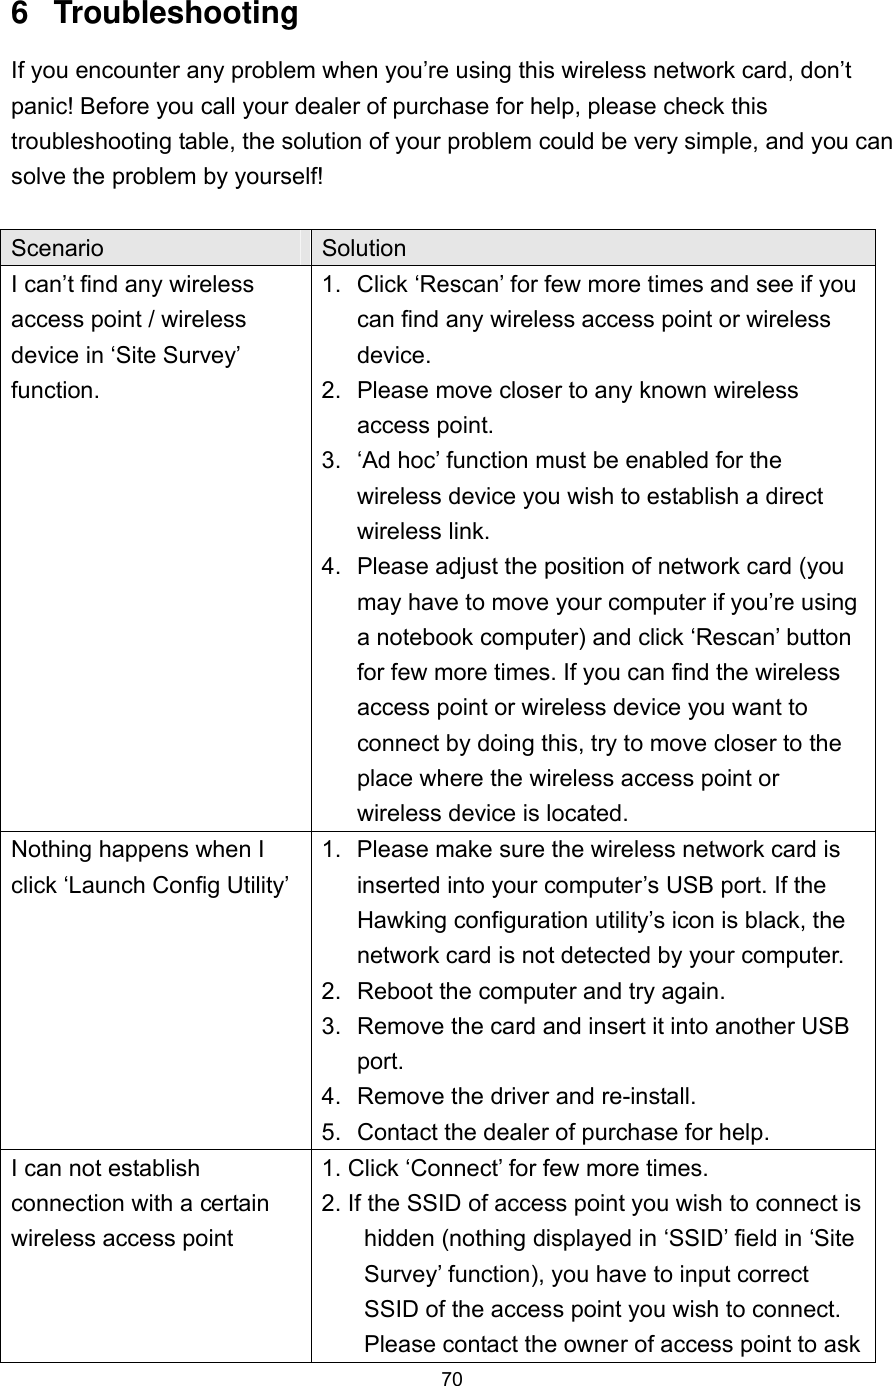  70 6 Troubleshooting If you encounter any problem when you’re using this wireless network card, don’t panic! Before you call your dealer of purchase for help, please check this troubleshooting table, the solution of your problem could be very simple, and you can solve the problem by yourself!  Scenario  Solution I can’t find any wireless access point / wireless device in ‘Site Survey’ function. 1.  Click ‘Rescan’ for few more times and see if you can find any wireless access point or wireless device. 2.  Please move closer to any known wireless access point. 3.  ‘Ad hoc’ function must be enabled for the wireless device you wish to establish a direct wireless link. 4.  Please adjust the position of network card (you may have to move your computer if you’re using a notebook computer) and click ‘Rescan’ button for few more times. If you can find the wireless access point or wireless device you want to connect by doing this, try to move closer to the place where the wireless access point or wireless device is located. Nothing happens when I click ‘Launch Config Utility’ 1.  Please make sure the wireless network card is inserted into your computer’s USB port. If the Hawking configuration utility’s icon is black, the network card is not detected by your computer. 2.  Reboot the computer and try again. 3.  Remove the card and insert it into another USB port. 4.  Remove the driver and re-install. 5.  Contact the dealer of purchase for help. I can not establish connection with a certain wireless access point 1. Click ‘Connect’ for few more times. 2. If the SSID of access point you wish to connect is hidden (nothing displayed in ‘SSID’ field in ‘Site Survey’ function), you have to input correct SSID of the access point you wish to connect. Please contact the owner of access point to ask 